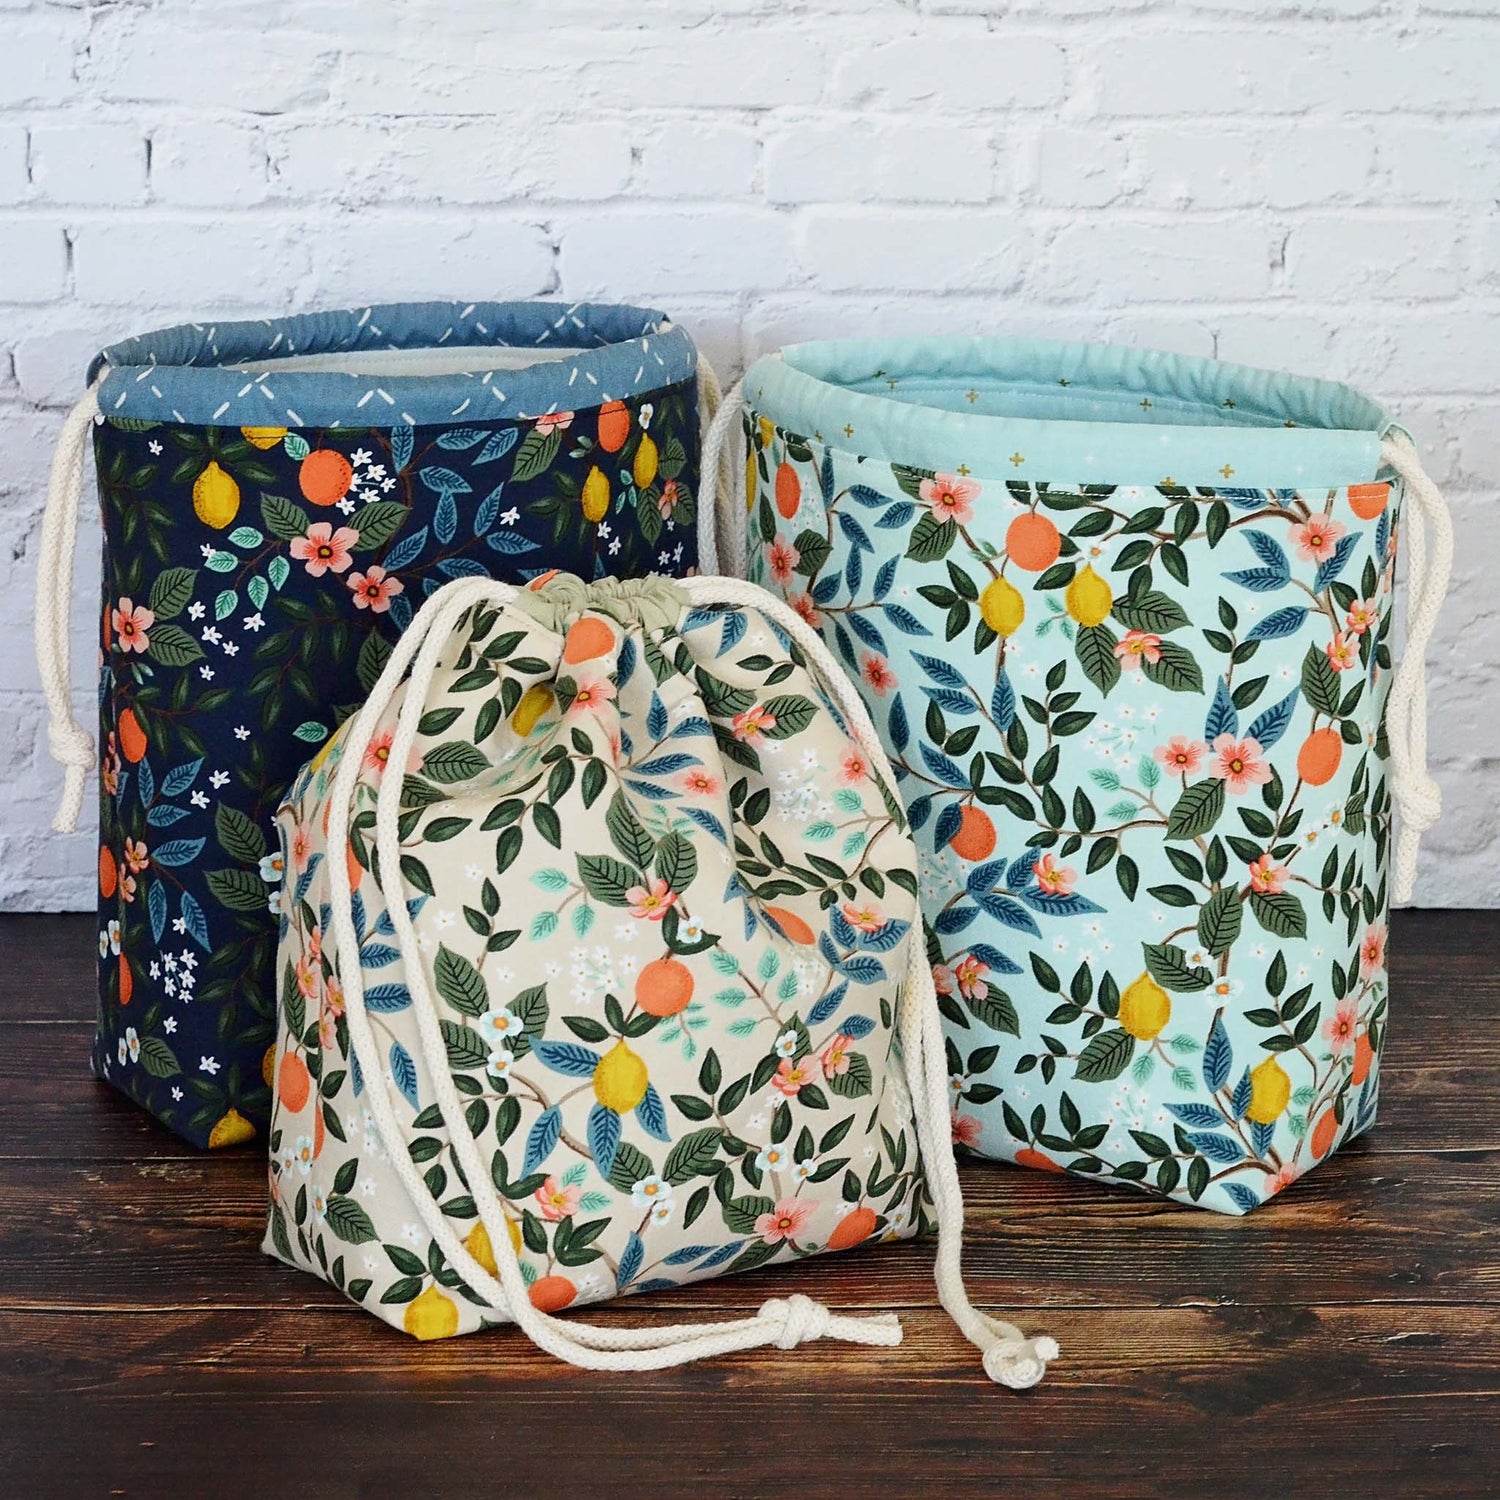 Beige Floral and Citrus Project Bag in Bramble by Rifle Paper Co